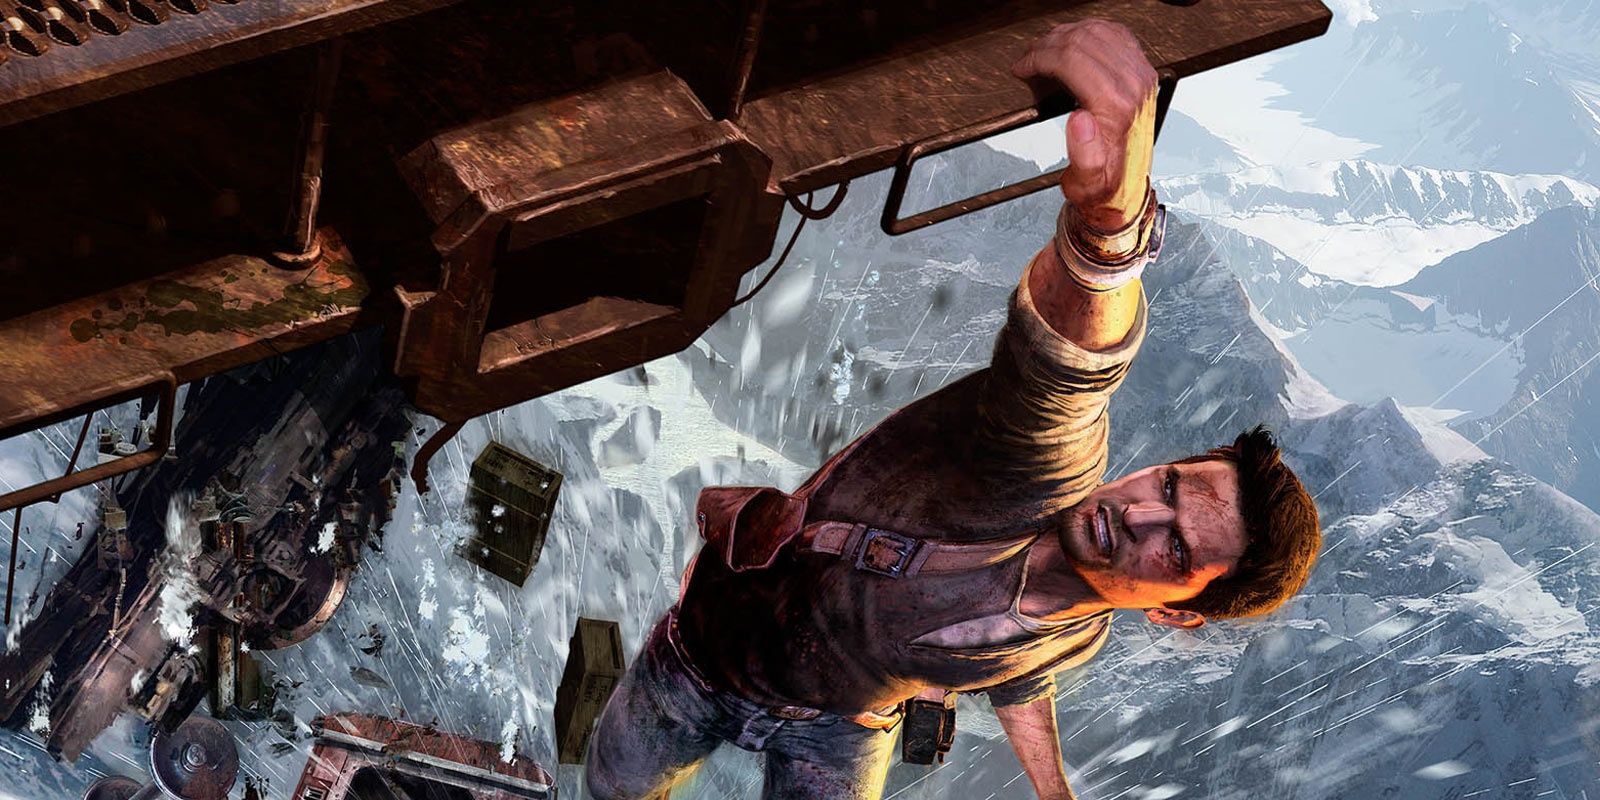 Uncharted 2 : Among Thieves